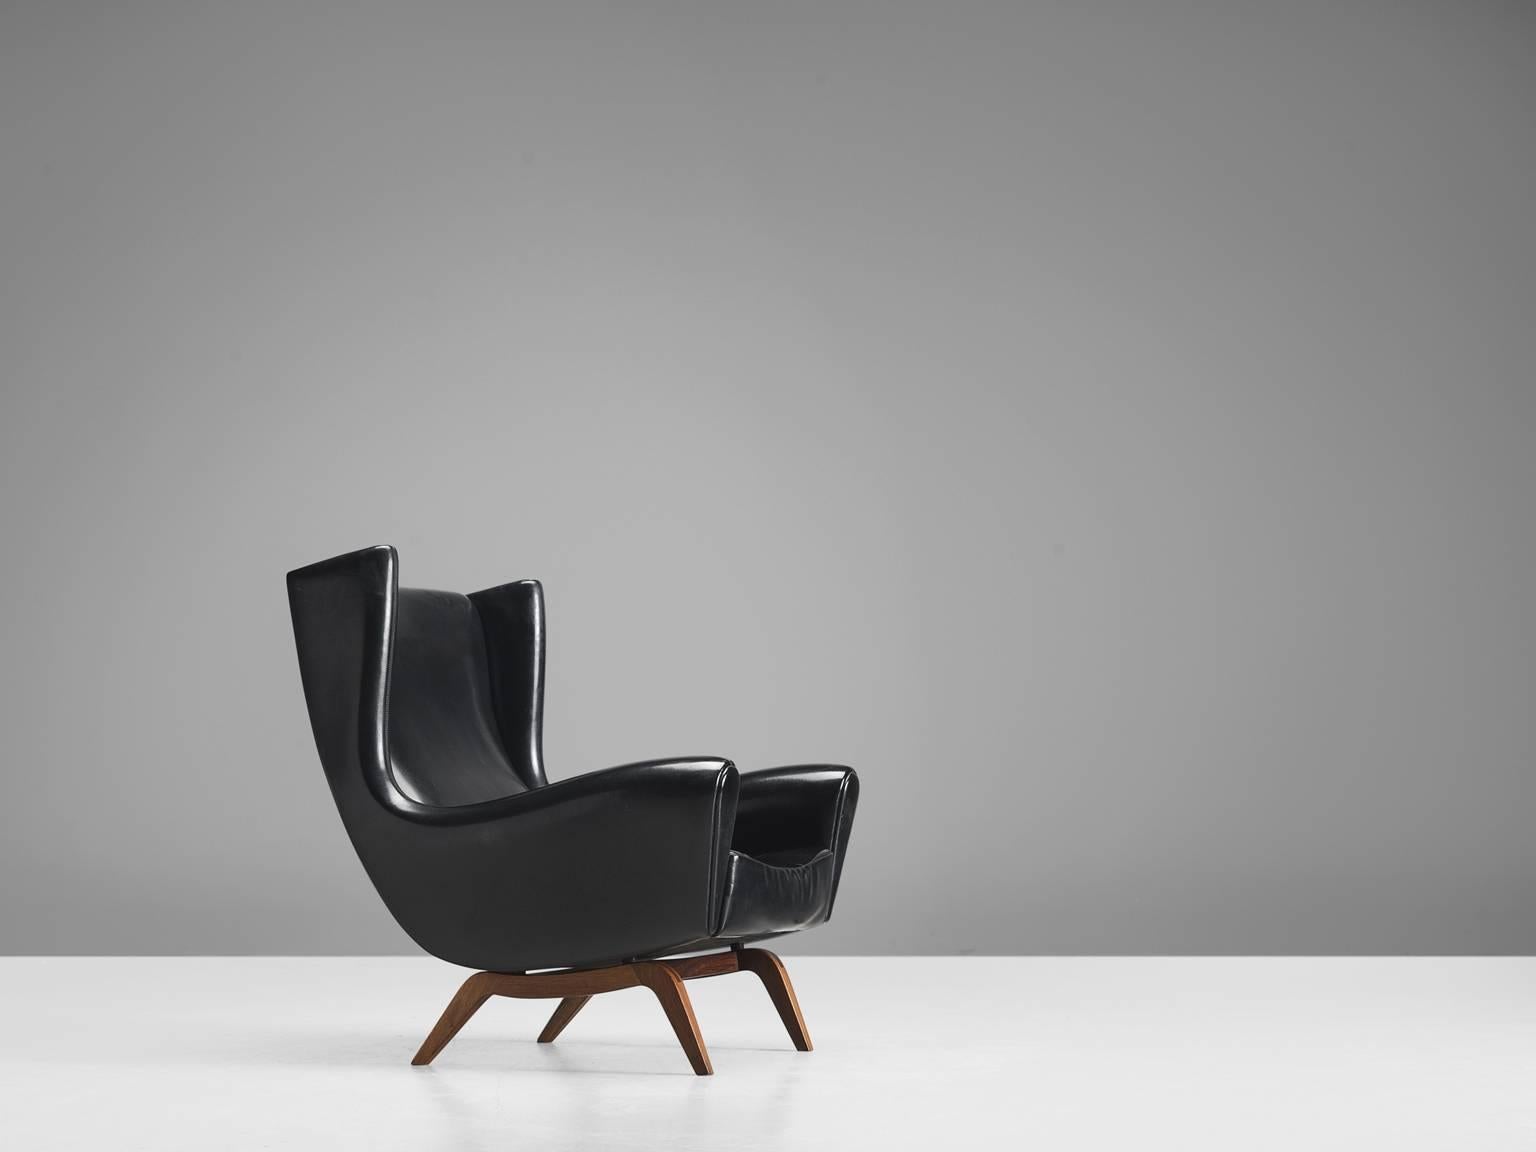 Lounge chair 'Model 110', in teak and black faux leather by Illum Wikkelsø for Søren Willadsen, Denmark, 1950s.

This well-designed armchair shows an unusual elegance and great eye for detail, combined with outstanding craftsmanship, which is